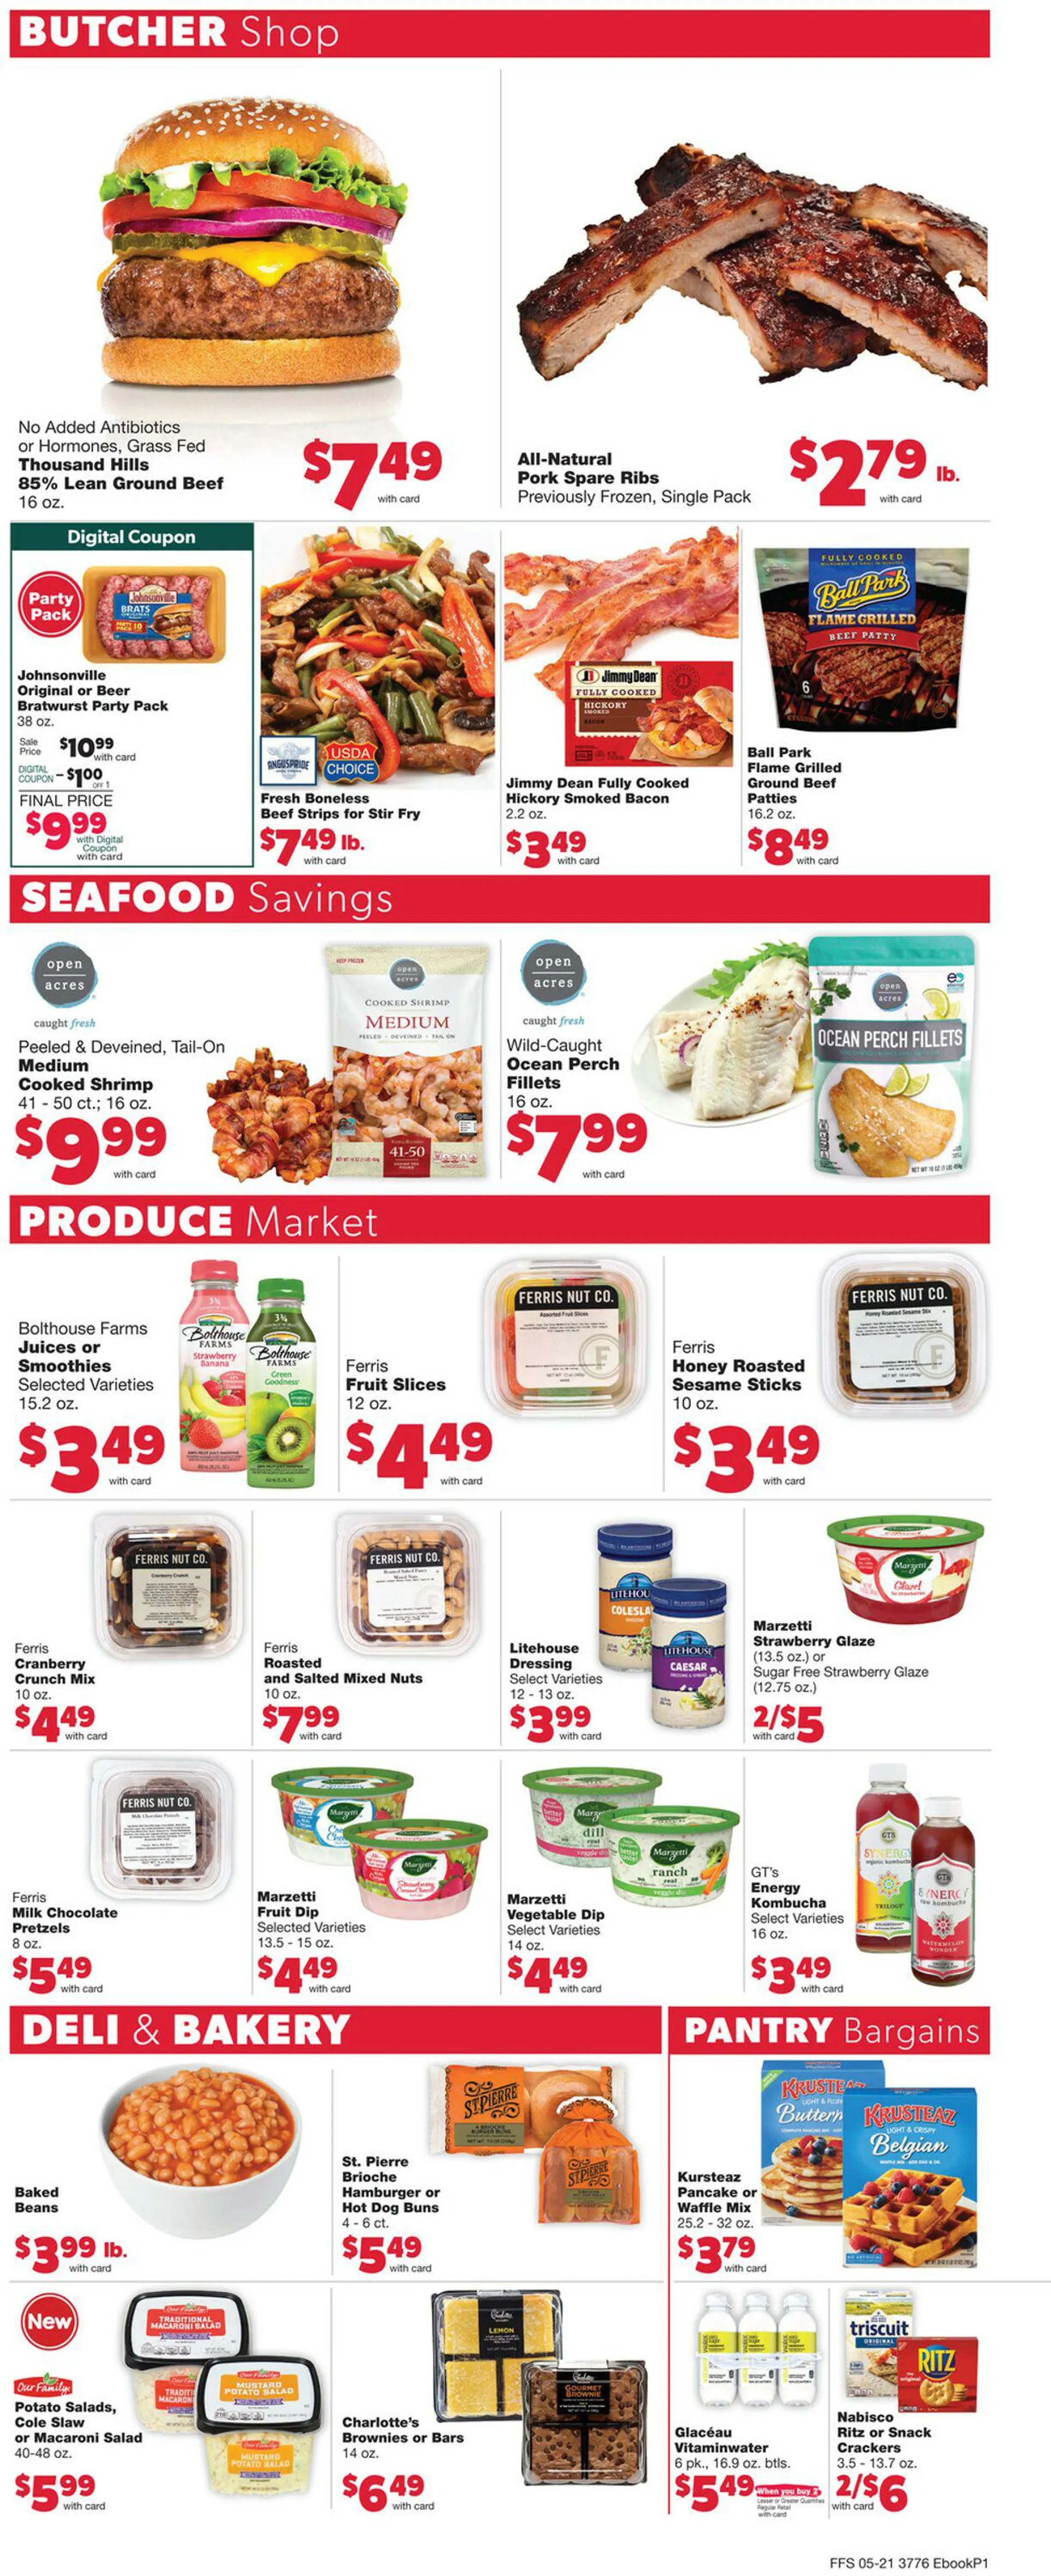 Family Fare Current weekly ad - 4